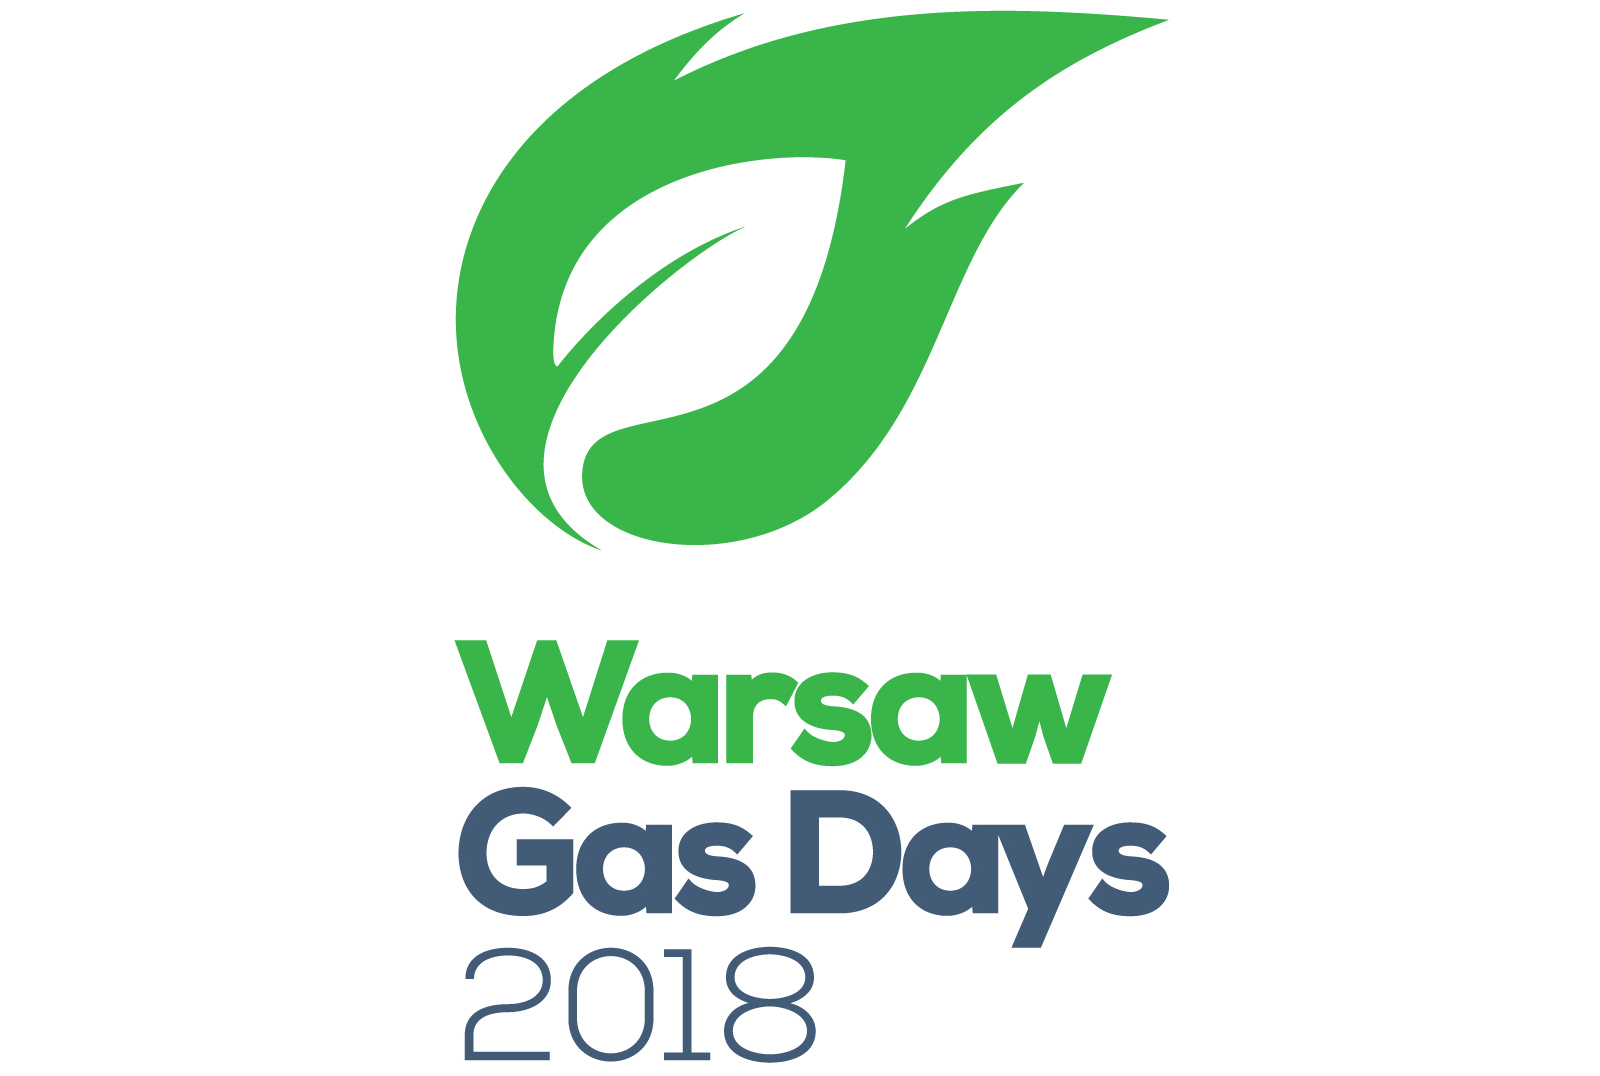 Warsaw Gas Days - only hours away